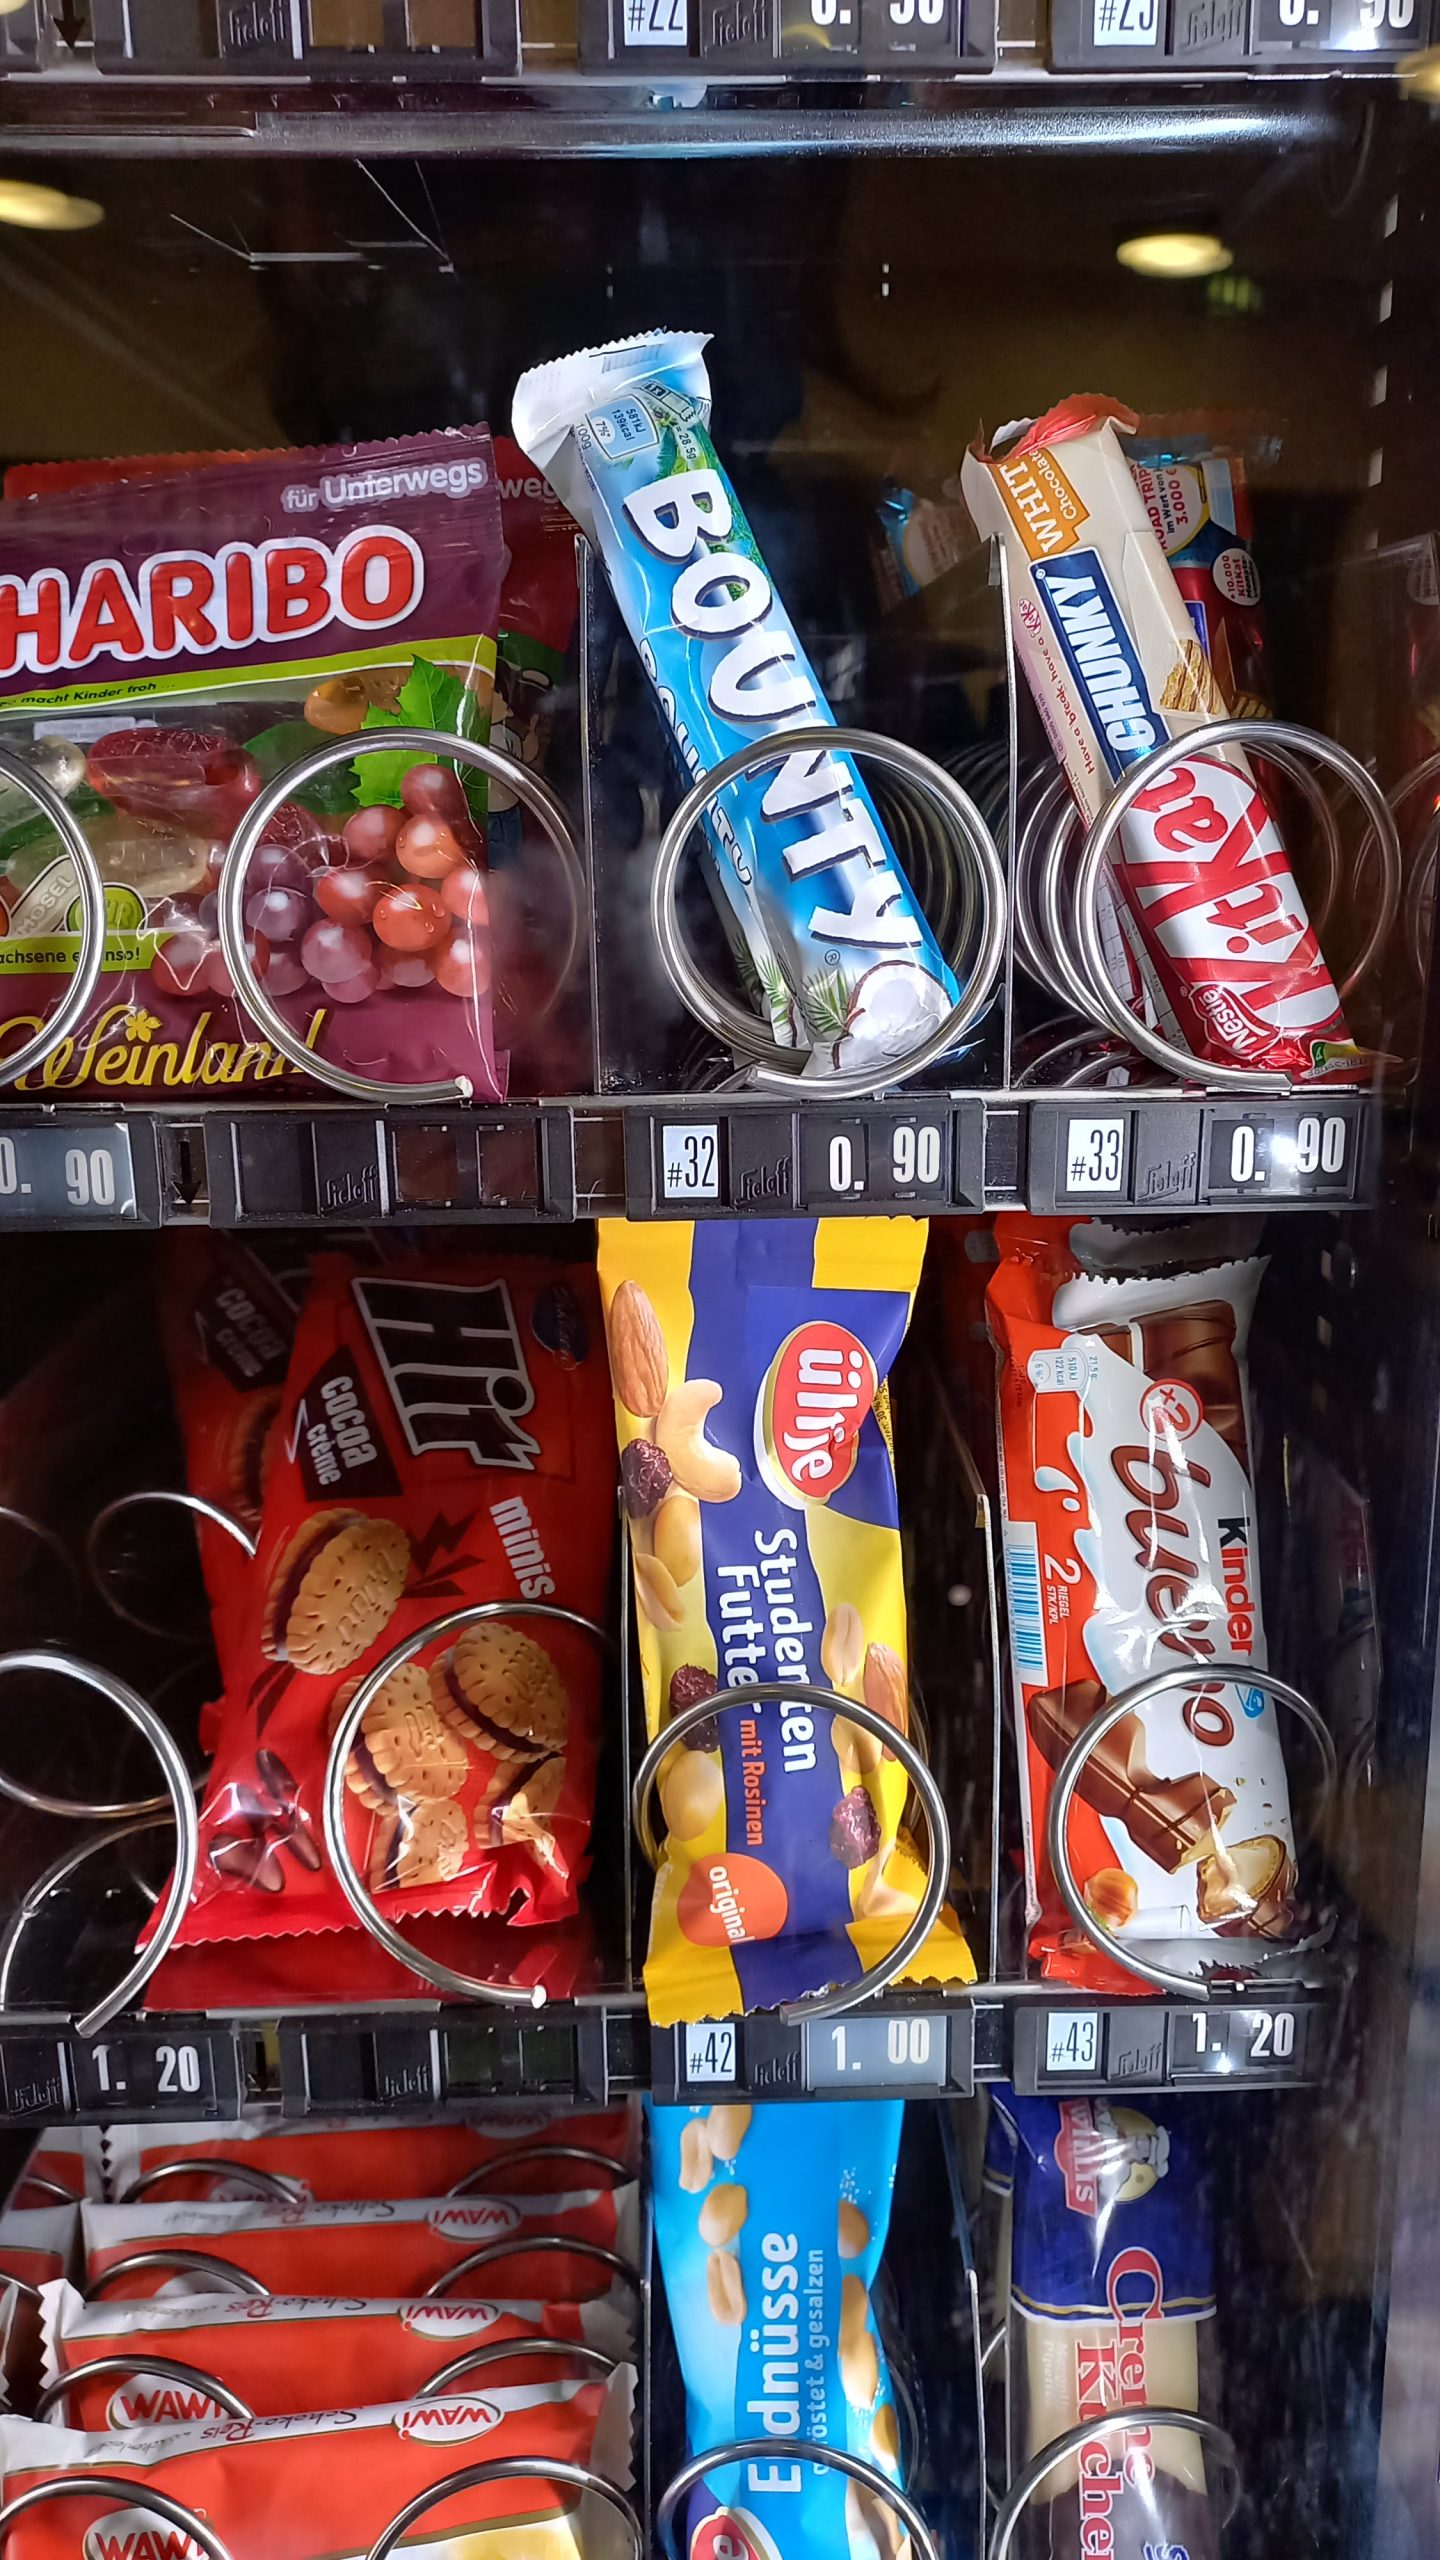 This snack machine has different snack, such as chocolate, peanuts or gum.